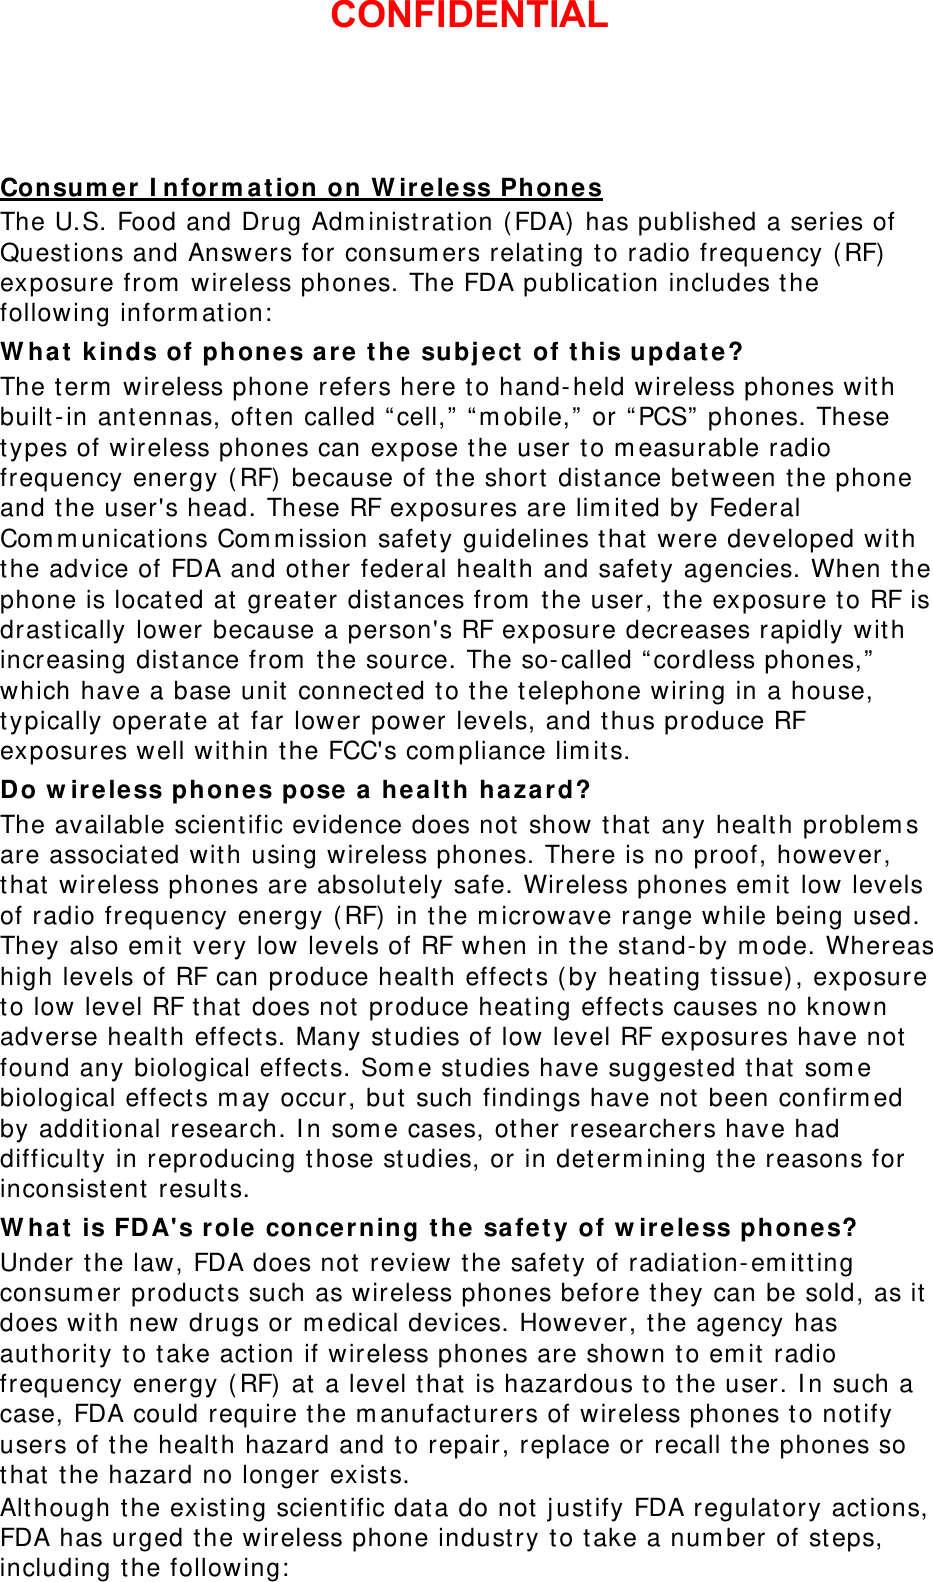 Consumer Information on Wireless Phones The U.S. Food and Drug Administration (FDA) has published a series of Questions and Answers for consumers relating to radio frequency (RF) exposure from wireless phones. The FDA publication includes the following information: What kinds of phones are the subject of this update? The term wireless phone refers here to hand-held wireless phones with built-in antennas, often called “cell,” “mobile,” or “PCS” phones. These types of wireless phones can expose the user to measurable radio frequency energy (RF) because of the short distance between the phone and the user&apos;s head. These RF exposures are limited by Federal Communications Commission safety guidelines that were developed with the advice of FDA and other federal health and safety agencies. When the phone is located at greater distances from the user, the exposure to RF is drastically lower because a person&apos;s RF exposure decreases rapidly with increasing distance from the source. The so-called “cordless phones,” which have a base unit connected to the telephone wiring in a house, typically operate at far lower power levels, and thus produce RF exposures well within the FCC&apos;s compliance limits. Do wireless phones pose a health hazard? The available scientific evidence does not show that any health problems are associated with using wireless phones. There is no proof, however, that wireless phones are absolutely safe. Wireless phones emit low levels of radio frequency energy (RF) in the microwave range while being used. They also emit very low levels of RF when in the stand-by mode. Whereas high levels of RF can produce health effects (by heating tissue), exposure to low level RF that does not produce heating effects causes no known adverse health effects. Many studies of low level RF exposures have not found any biological effects. Some studies have suggested that some biological effects may occur, but such findings have not been confirmed by additional research. In some cases, other researchers have had difficulty in reproducing those studies, or in determining the reasons for inconsistent results. What is FDA&apos;s role concerning the safety of wireless phones? Under the law, FDA does not review the safety of radiation-emitting consumer products such as wireless phones before they can be sold, as it does with new drugs or medical devices. However, the agency has authority to take action if wireless phones are shown to emit radio frequency energy (RF) at a level that is hazardous to the user. In such a case, FDA could require the manufacturers of wireless phones to notify users of the health hazard and to repair, replace or recall the phones so that the hazard no longer exists. Although the existing scientific data do not justify FDA regulatory actions, FDA has urged the wireless phone industry to take a number of steps, including the following: CONFIDENTIAL